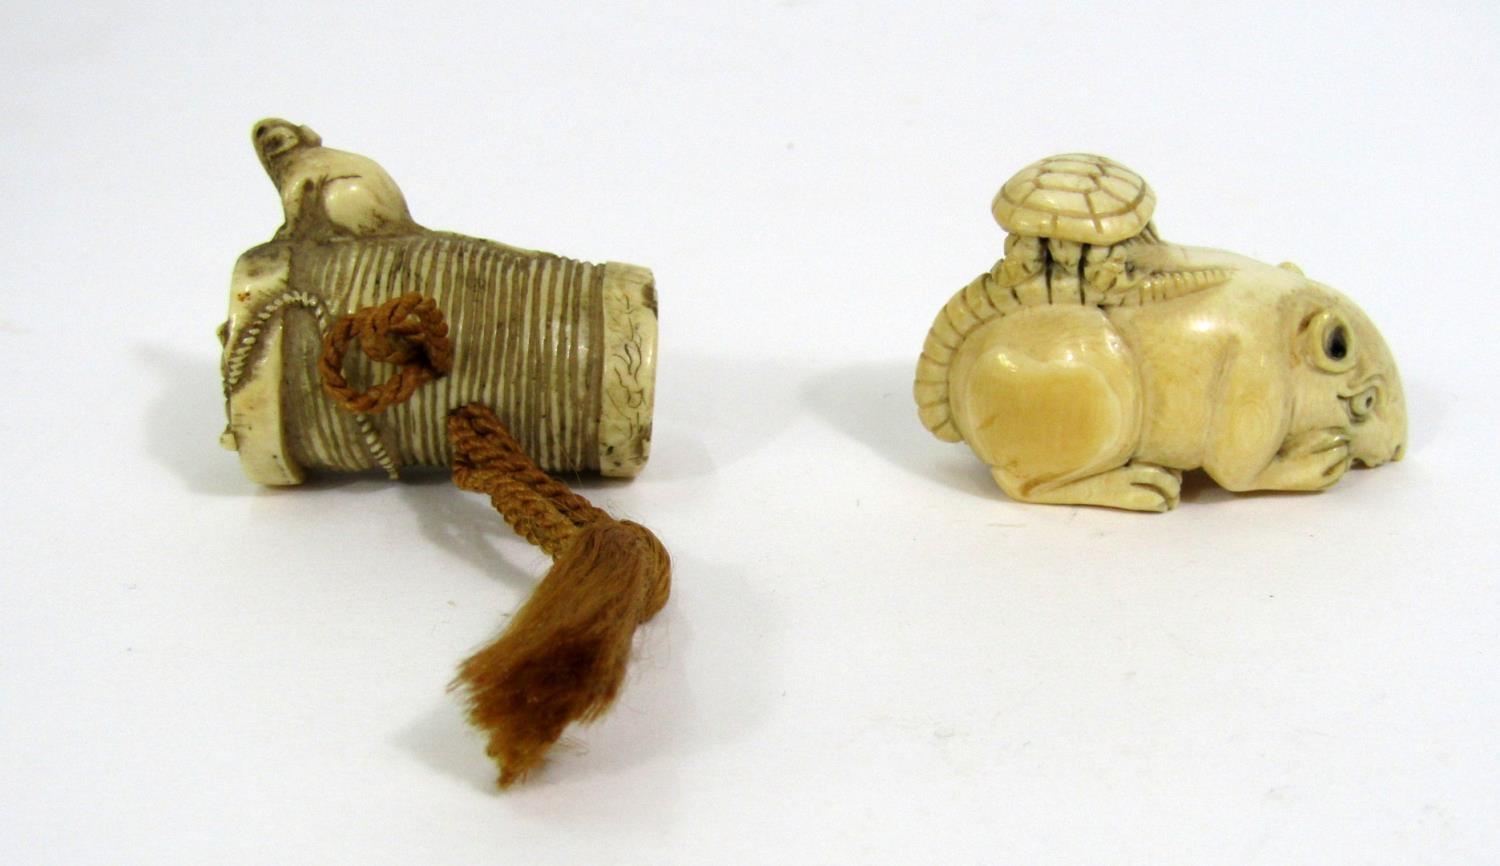 Meiji Period - Ivory Netsuke of a surprised rat with a tortoise on his back and another two rats - Image 2 of 2